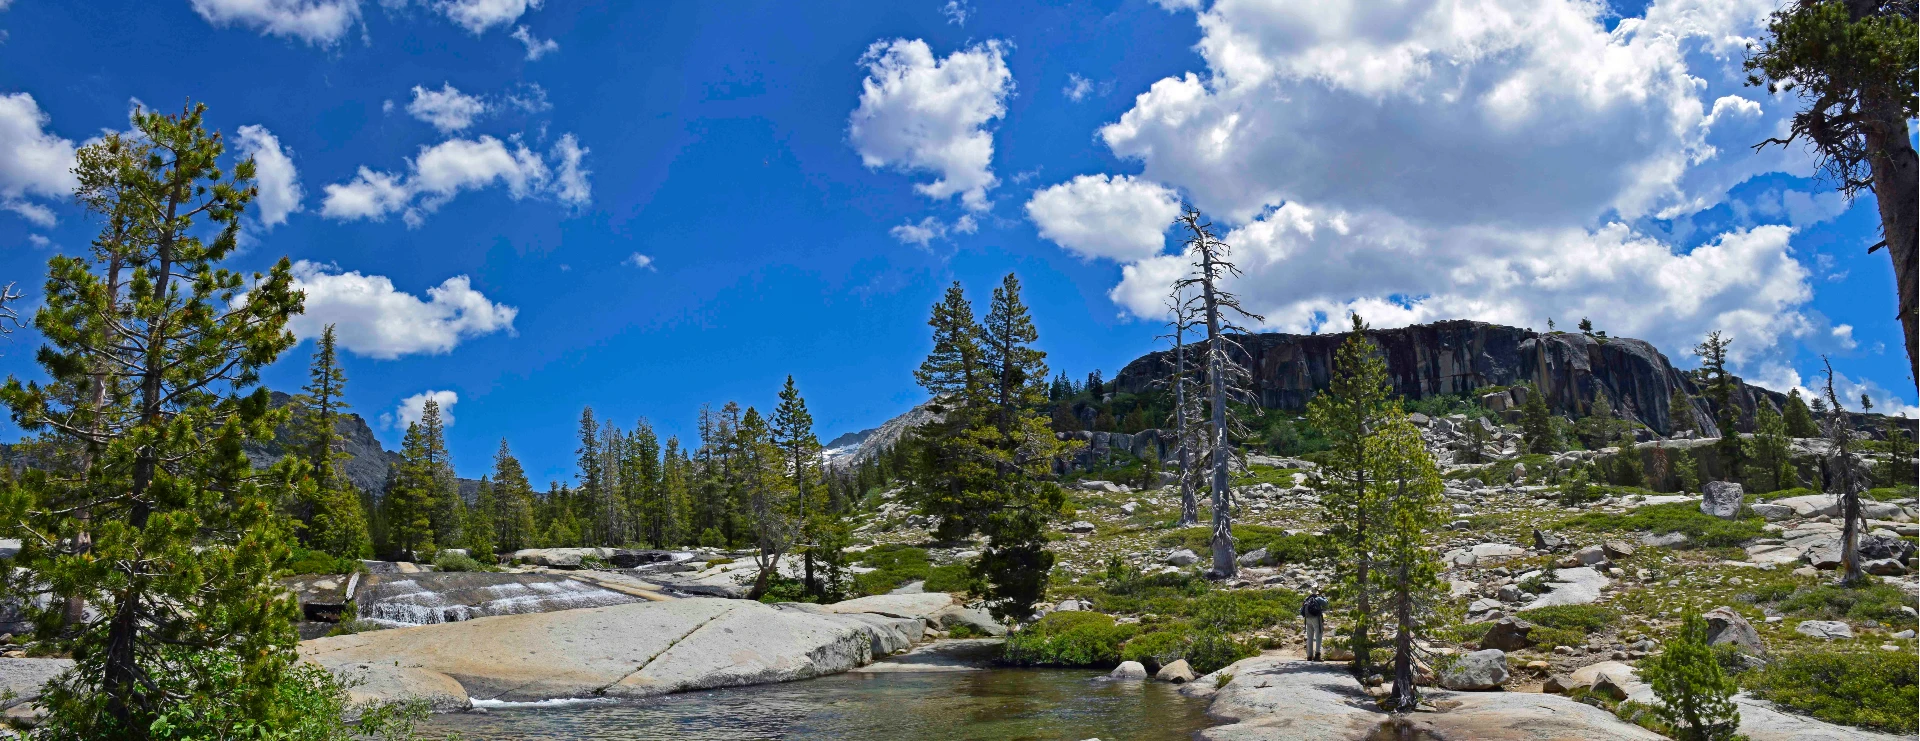 Granite wilderness, Creek, cloudy day with blue sky